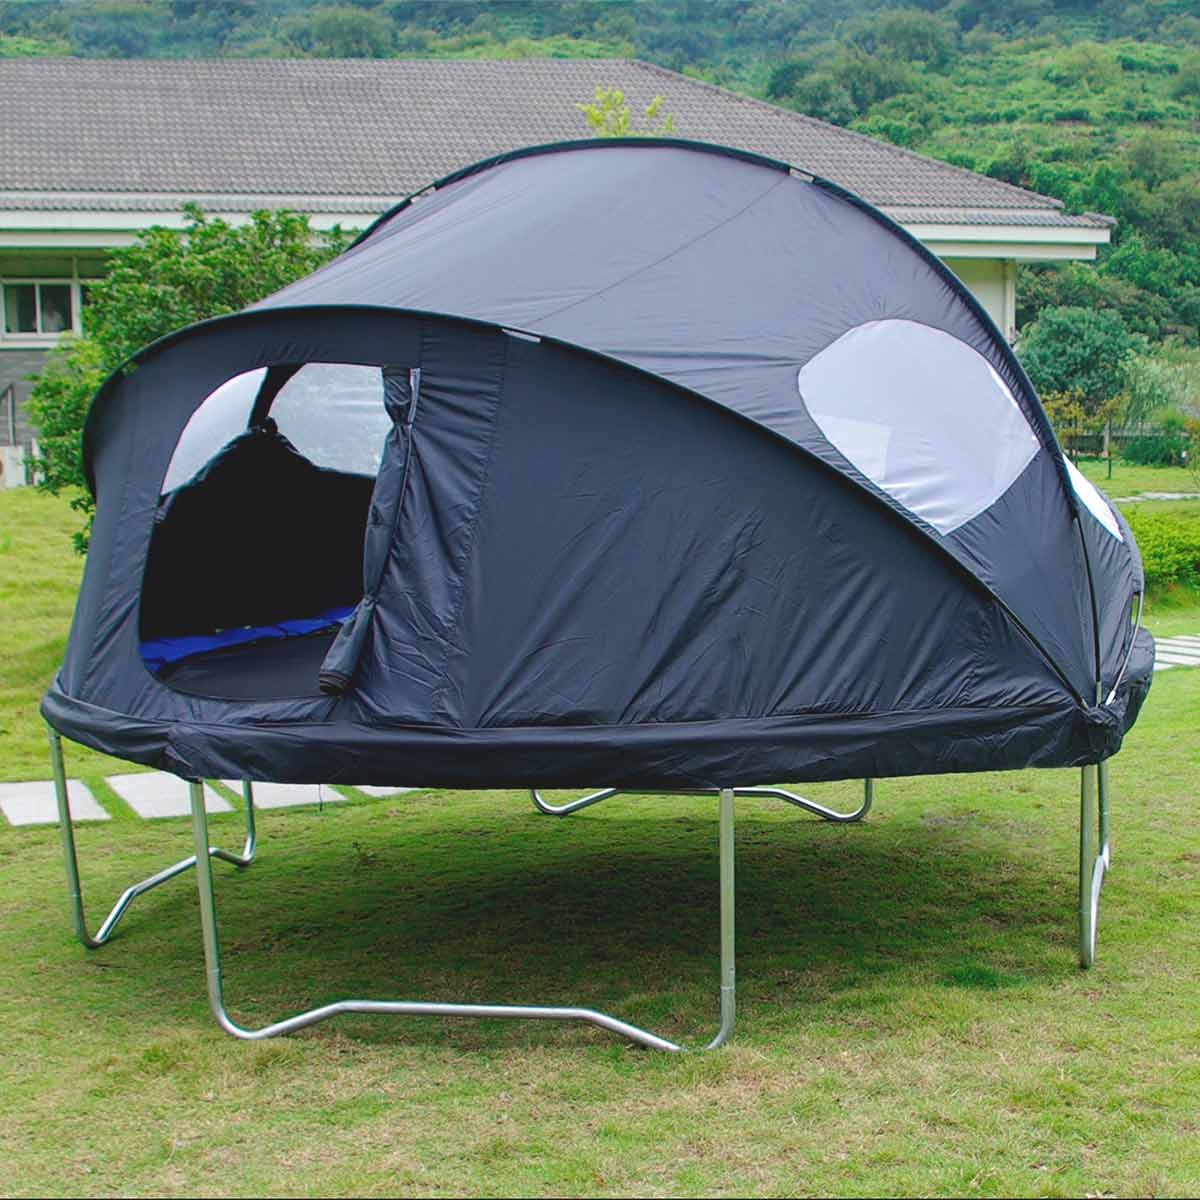 A black camping trampoline tent with steel stands